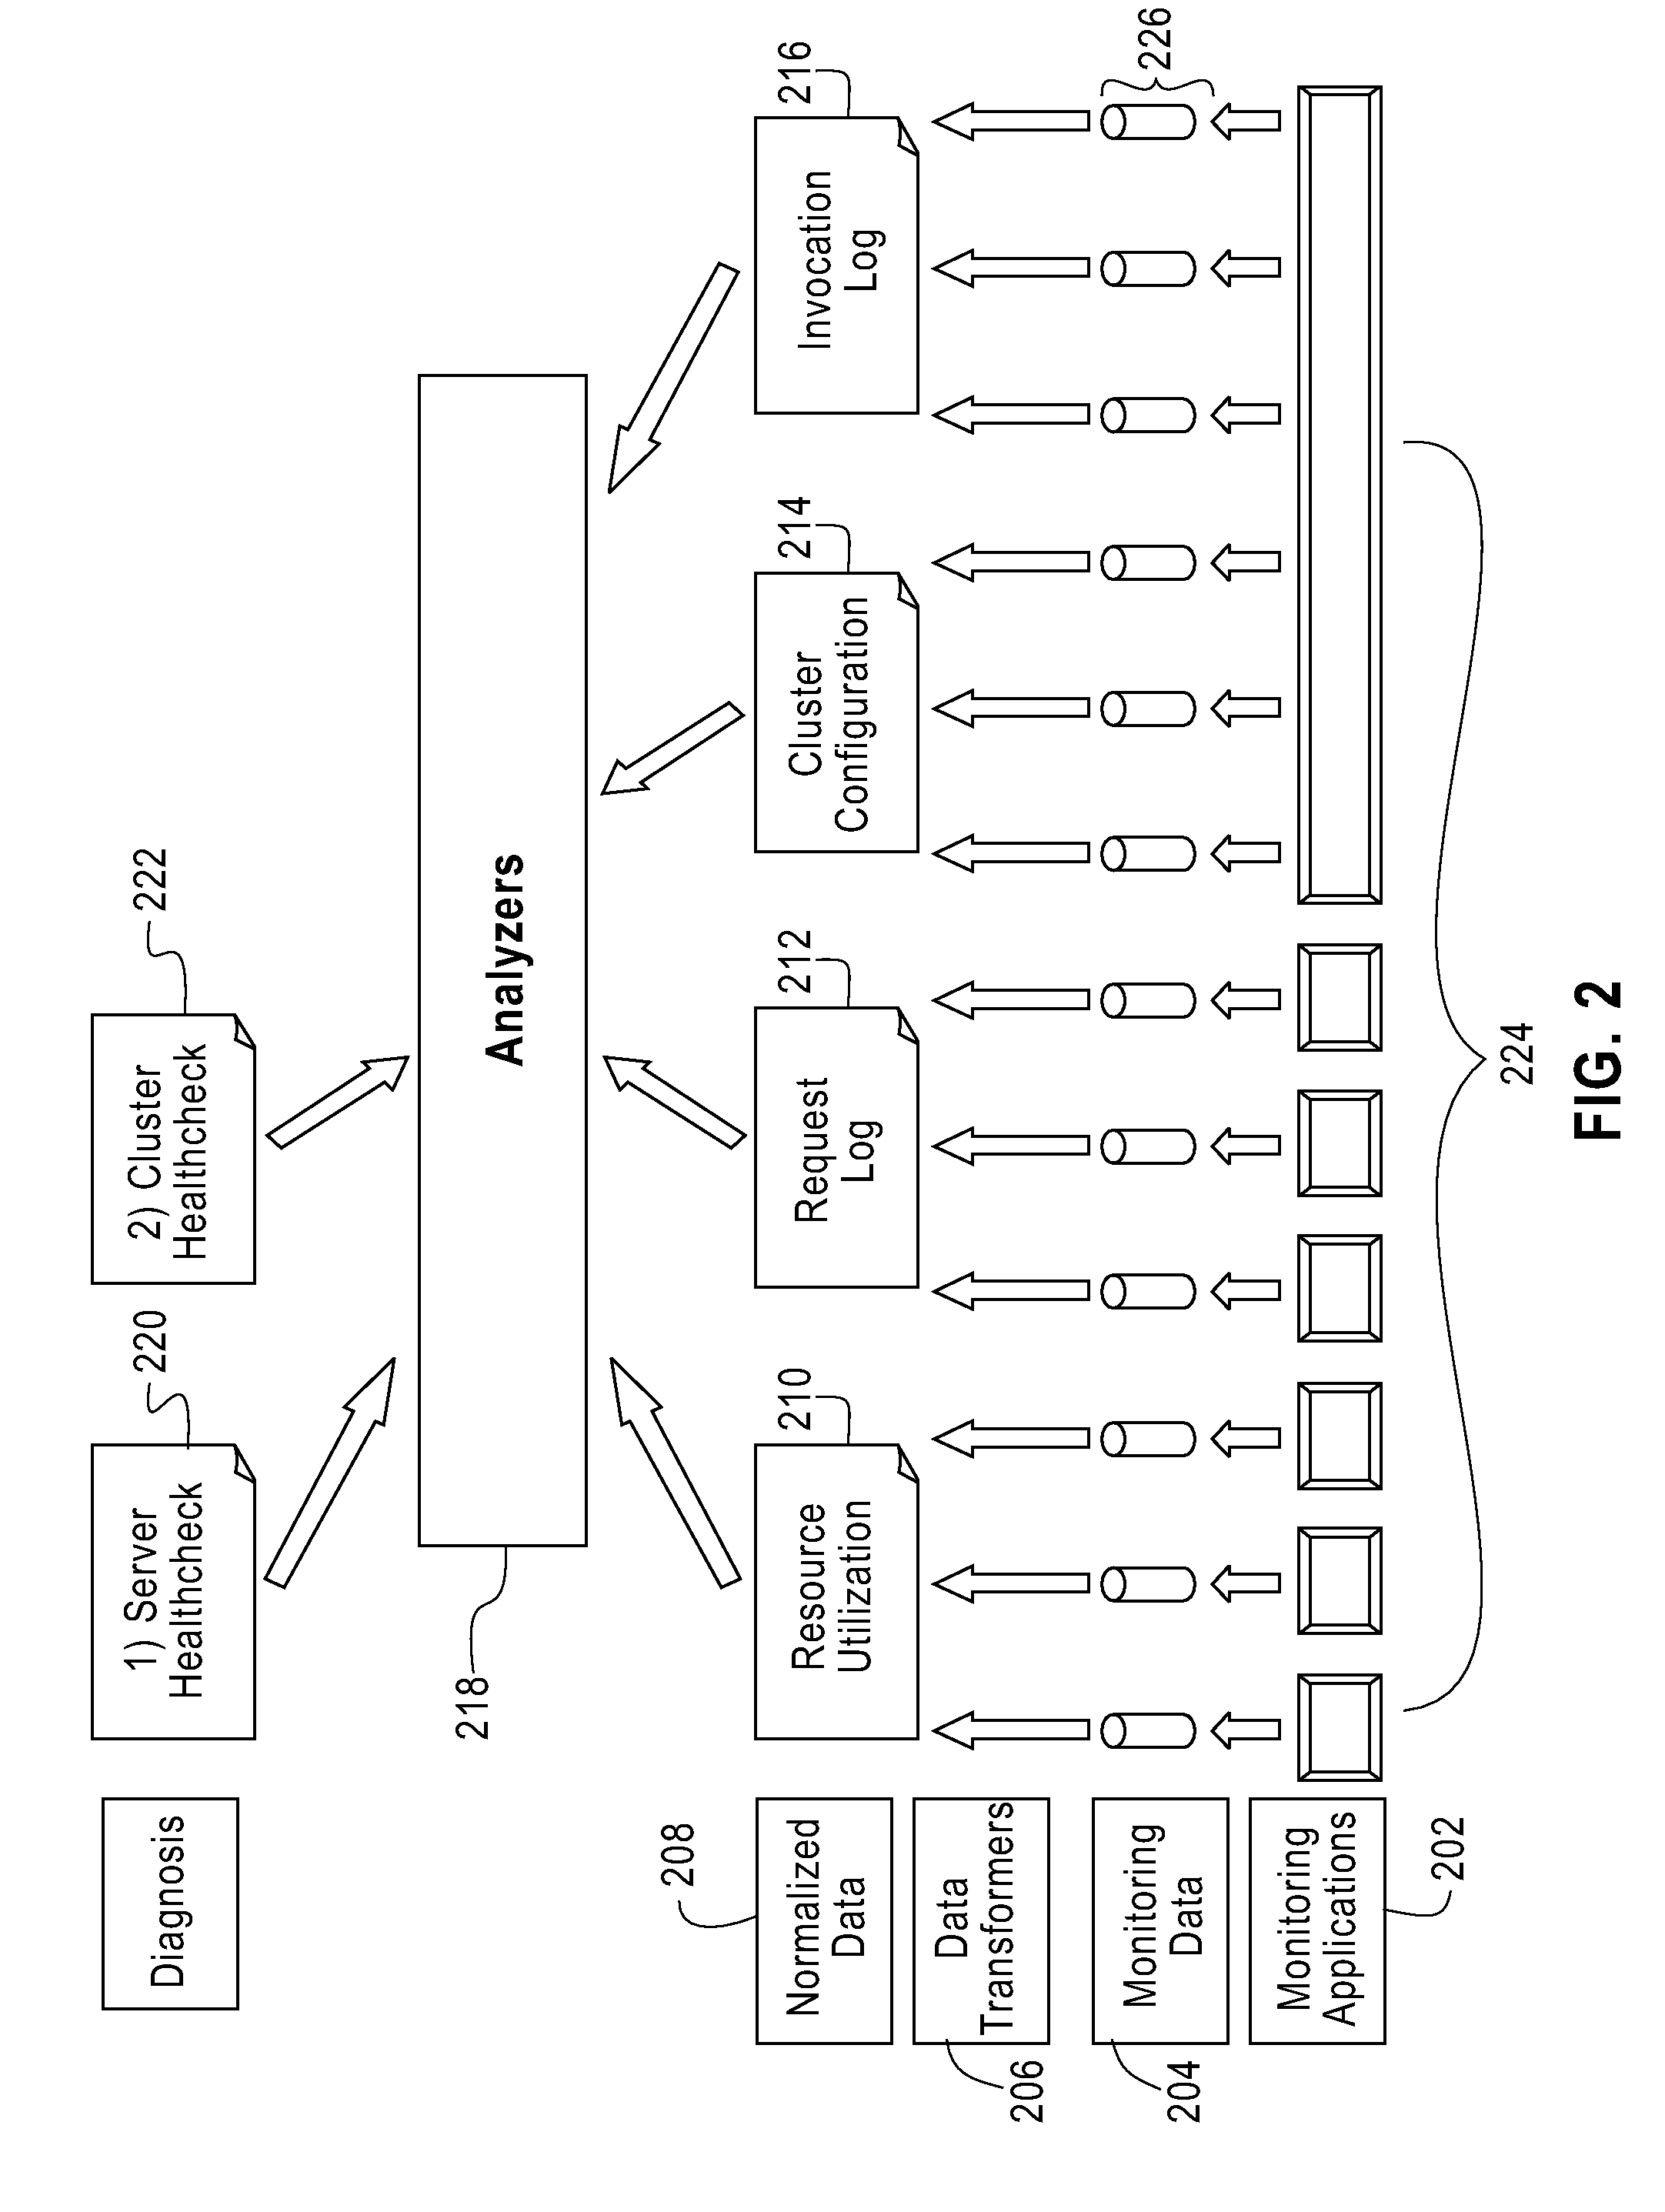 Apparatus, system and method for healthcheck of information technology infrastructure based on log data